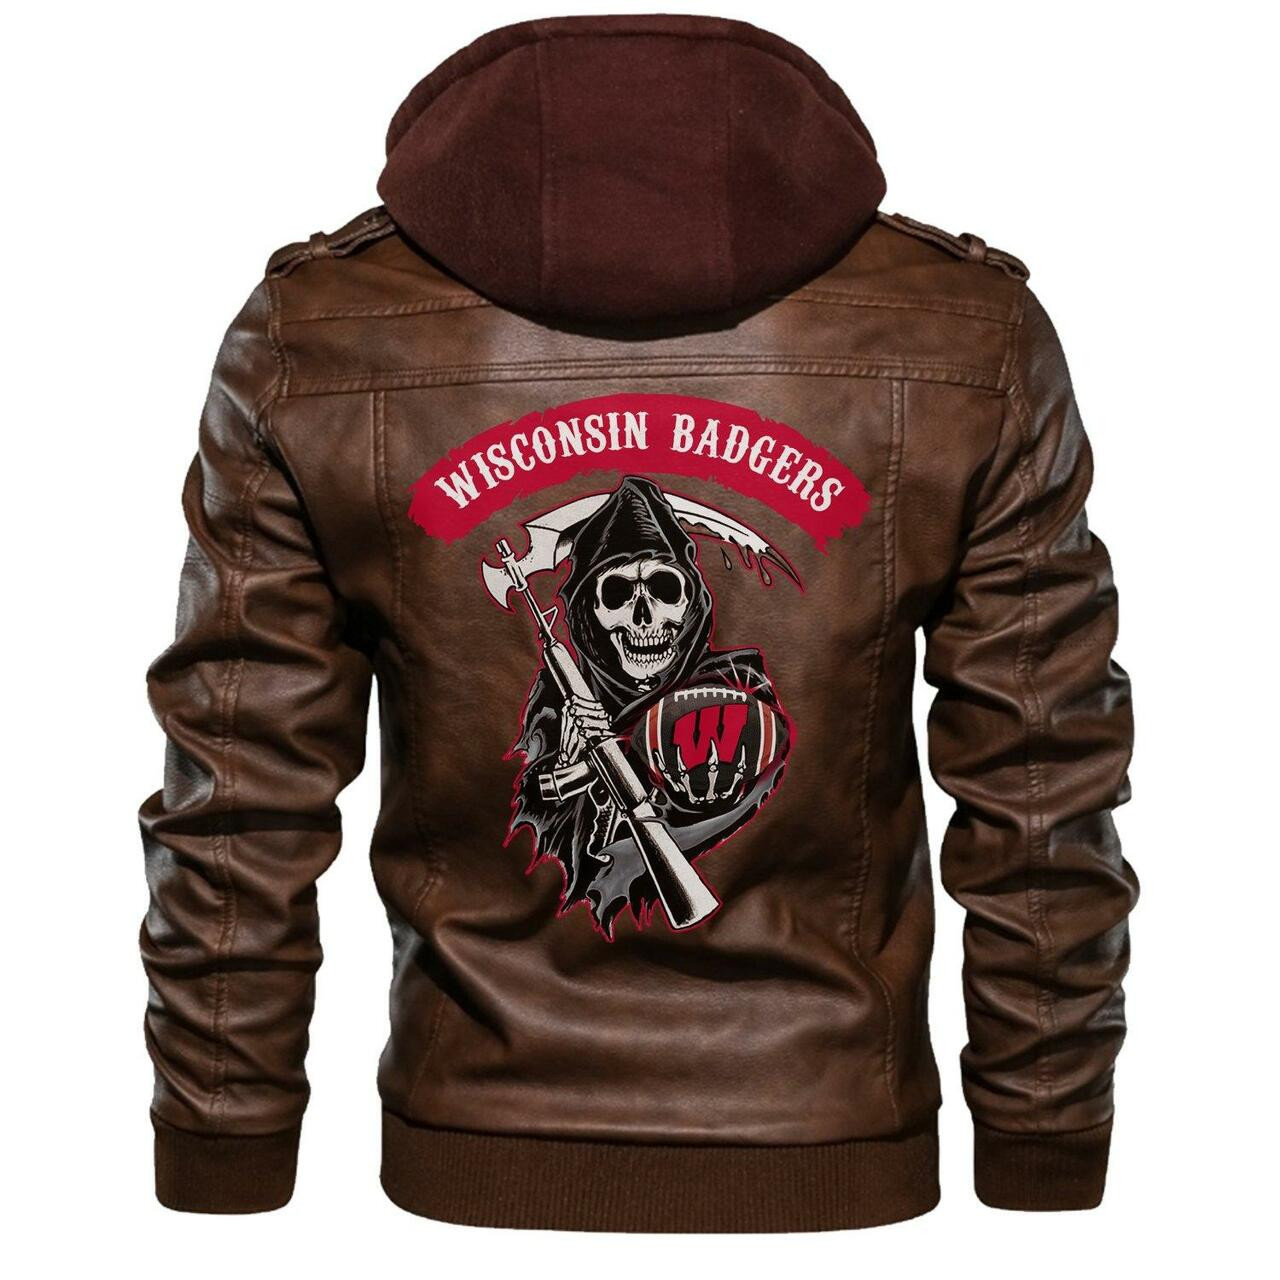 Our store has all of the latest leather jacket 19